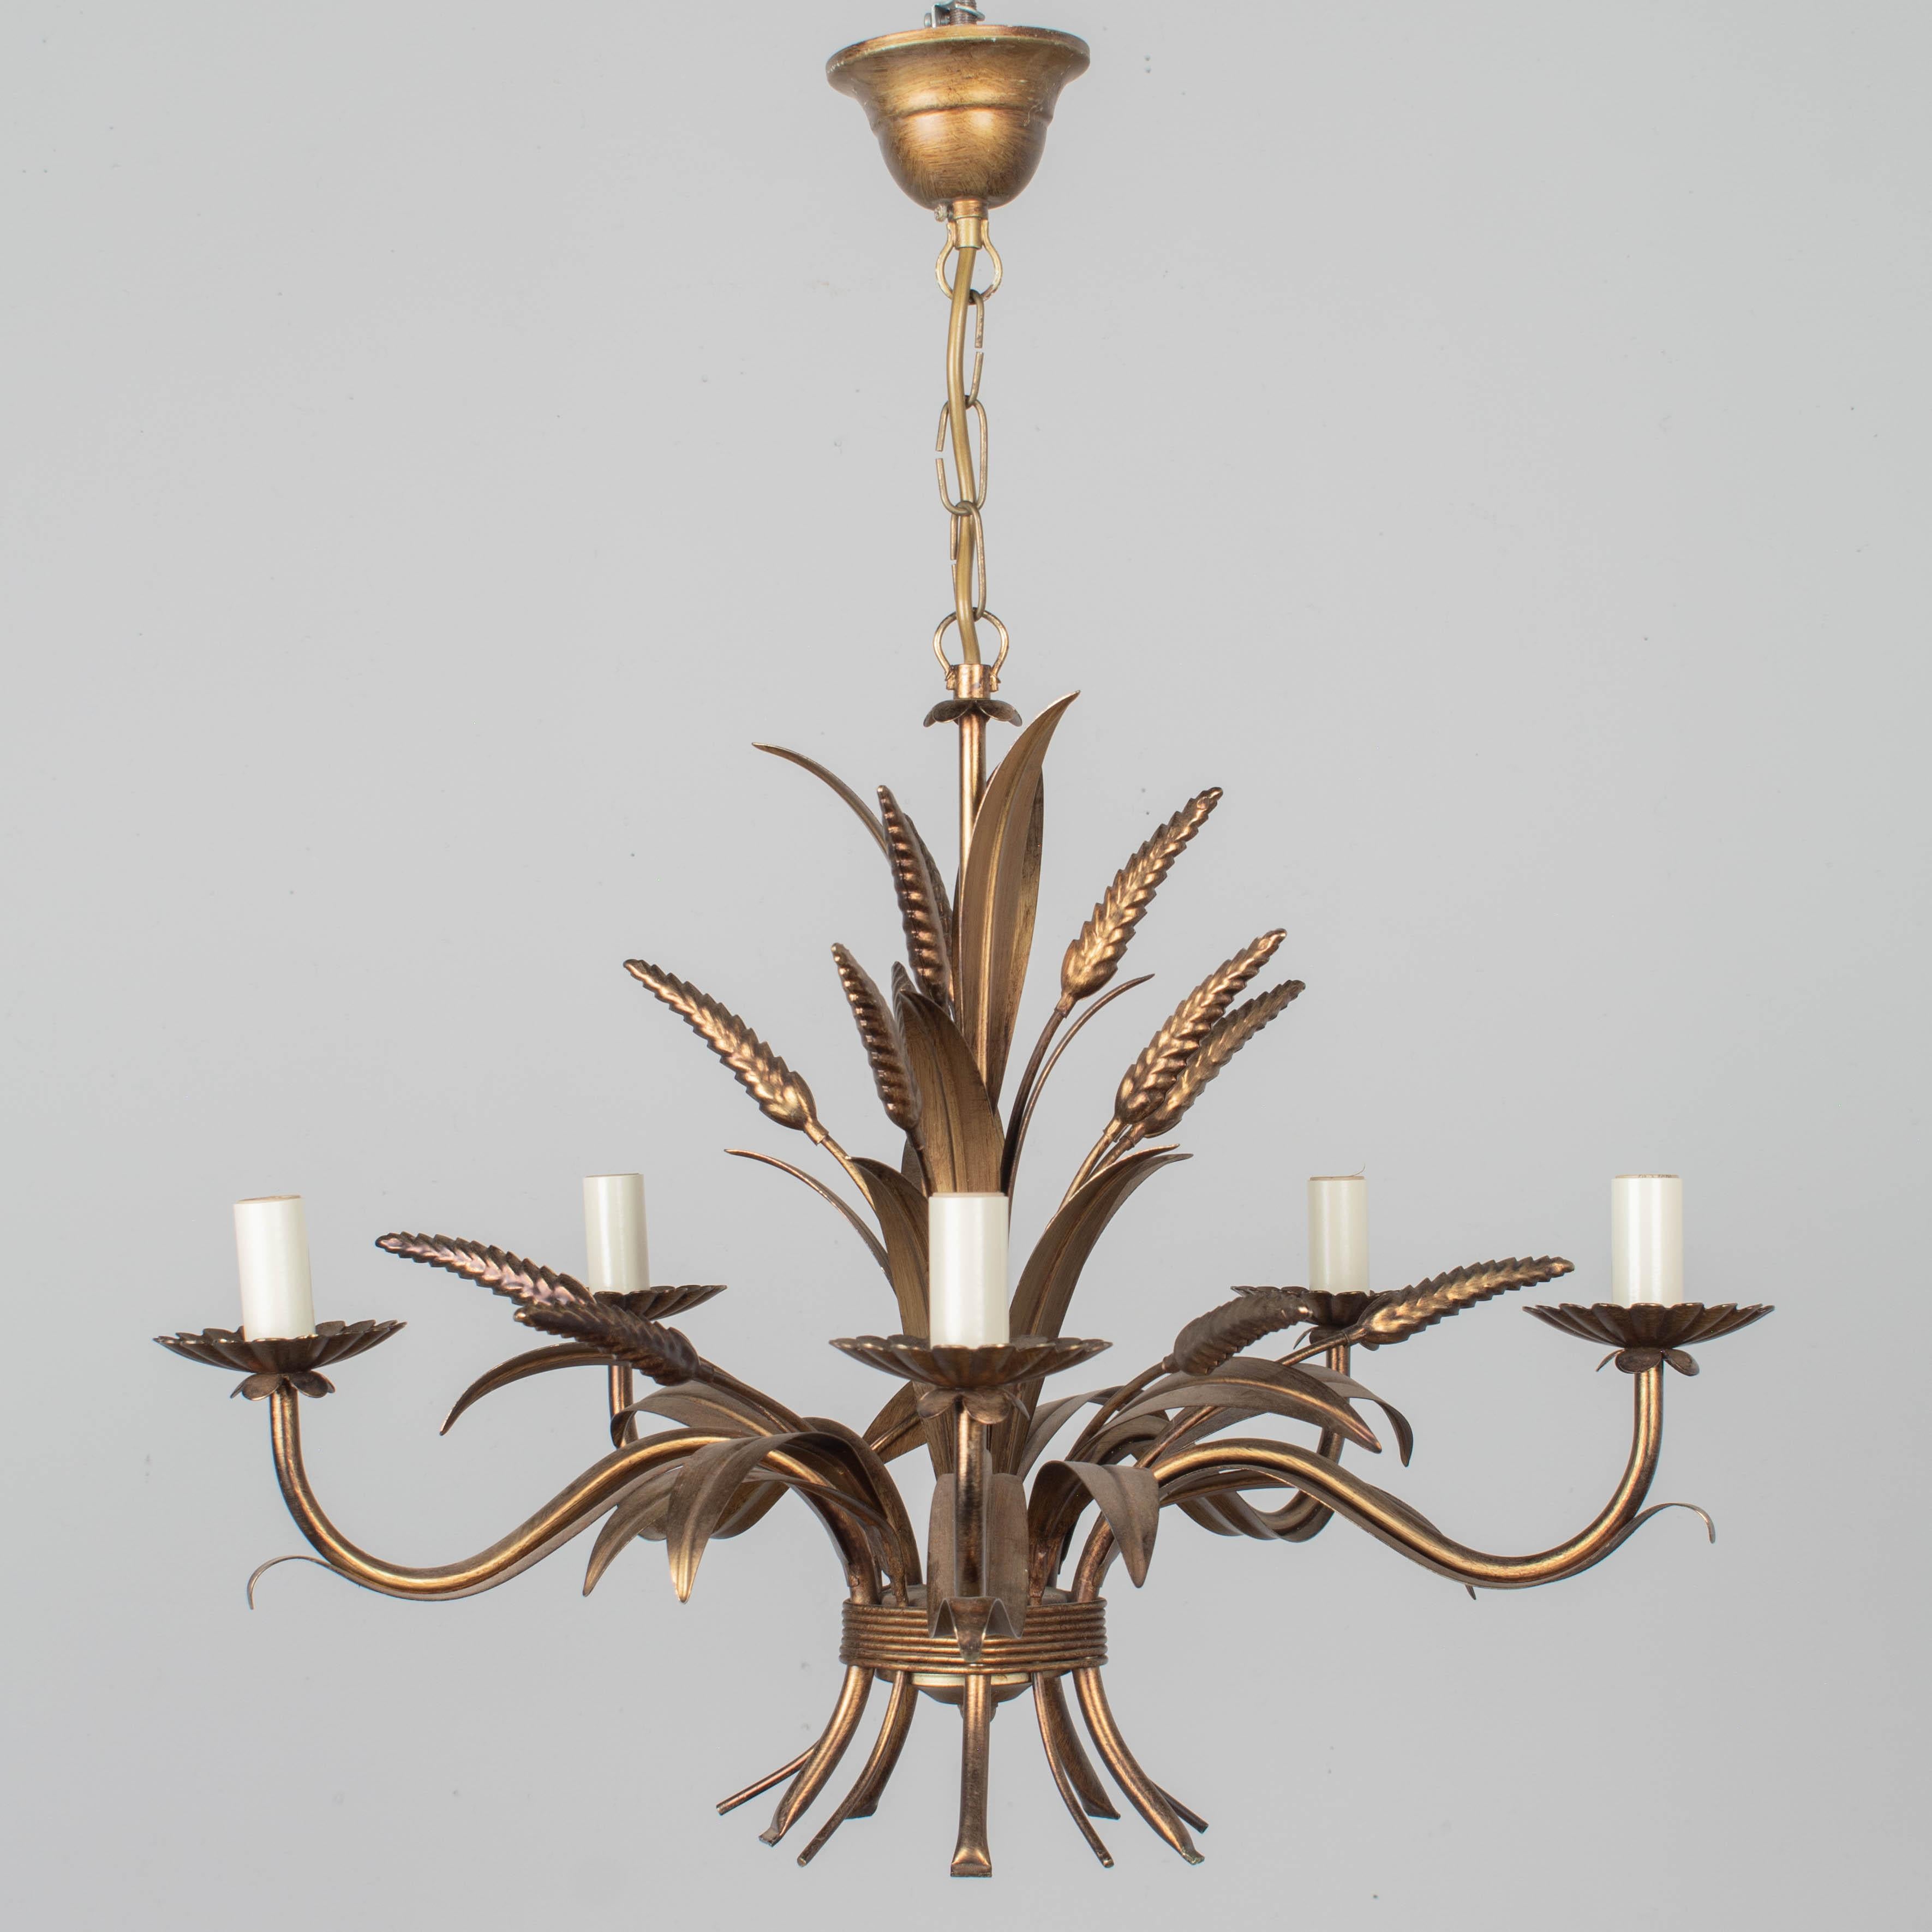 A Hollywood Regency style five-light gilt metal chandelier with sheaf of wheat. Good condition with warm copper tone finish. Designed by Hans Kögl and made in Italy. New sockets and candle covers. In working order. Good original vintage condition